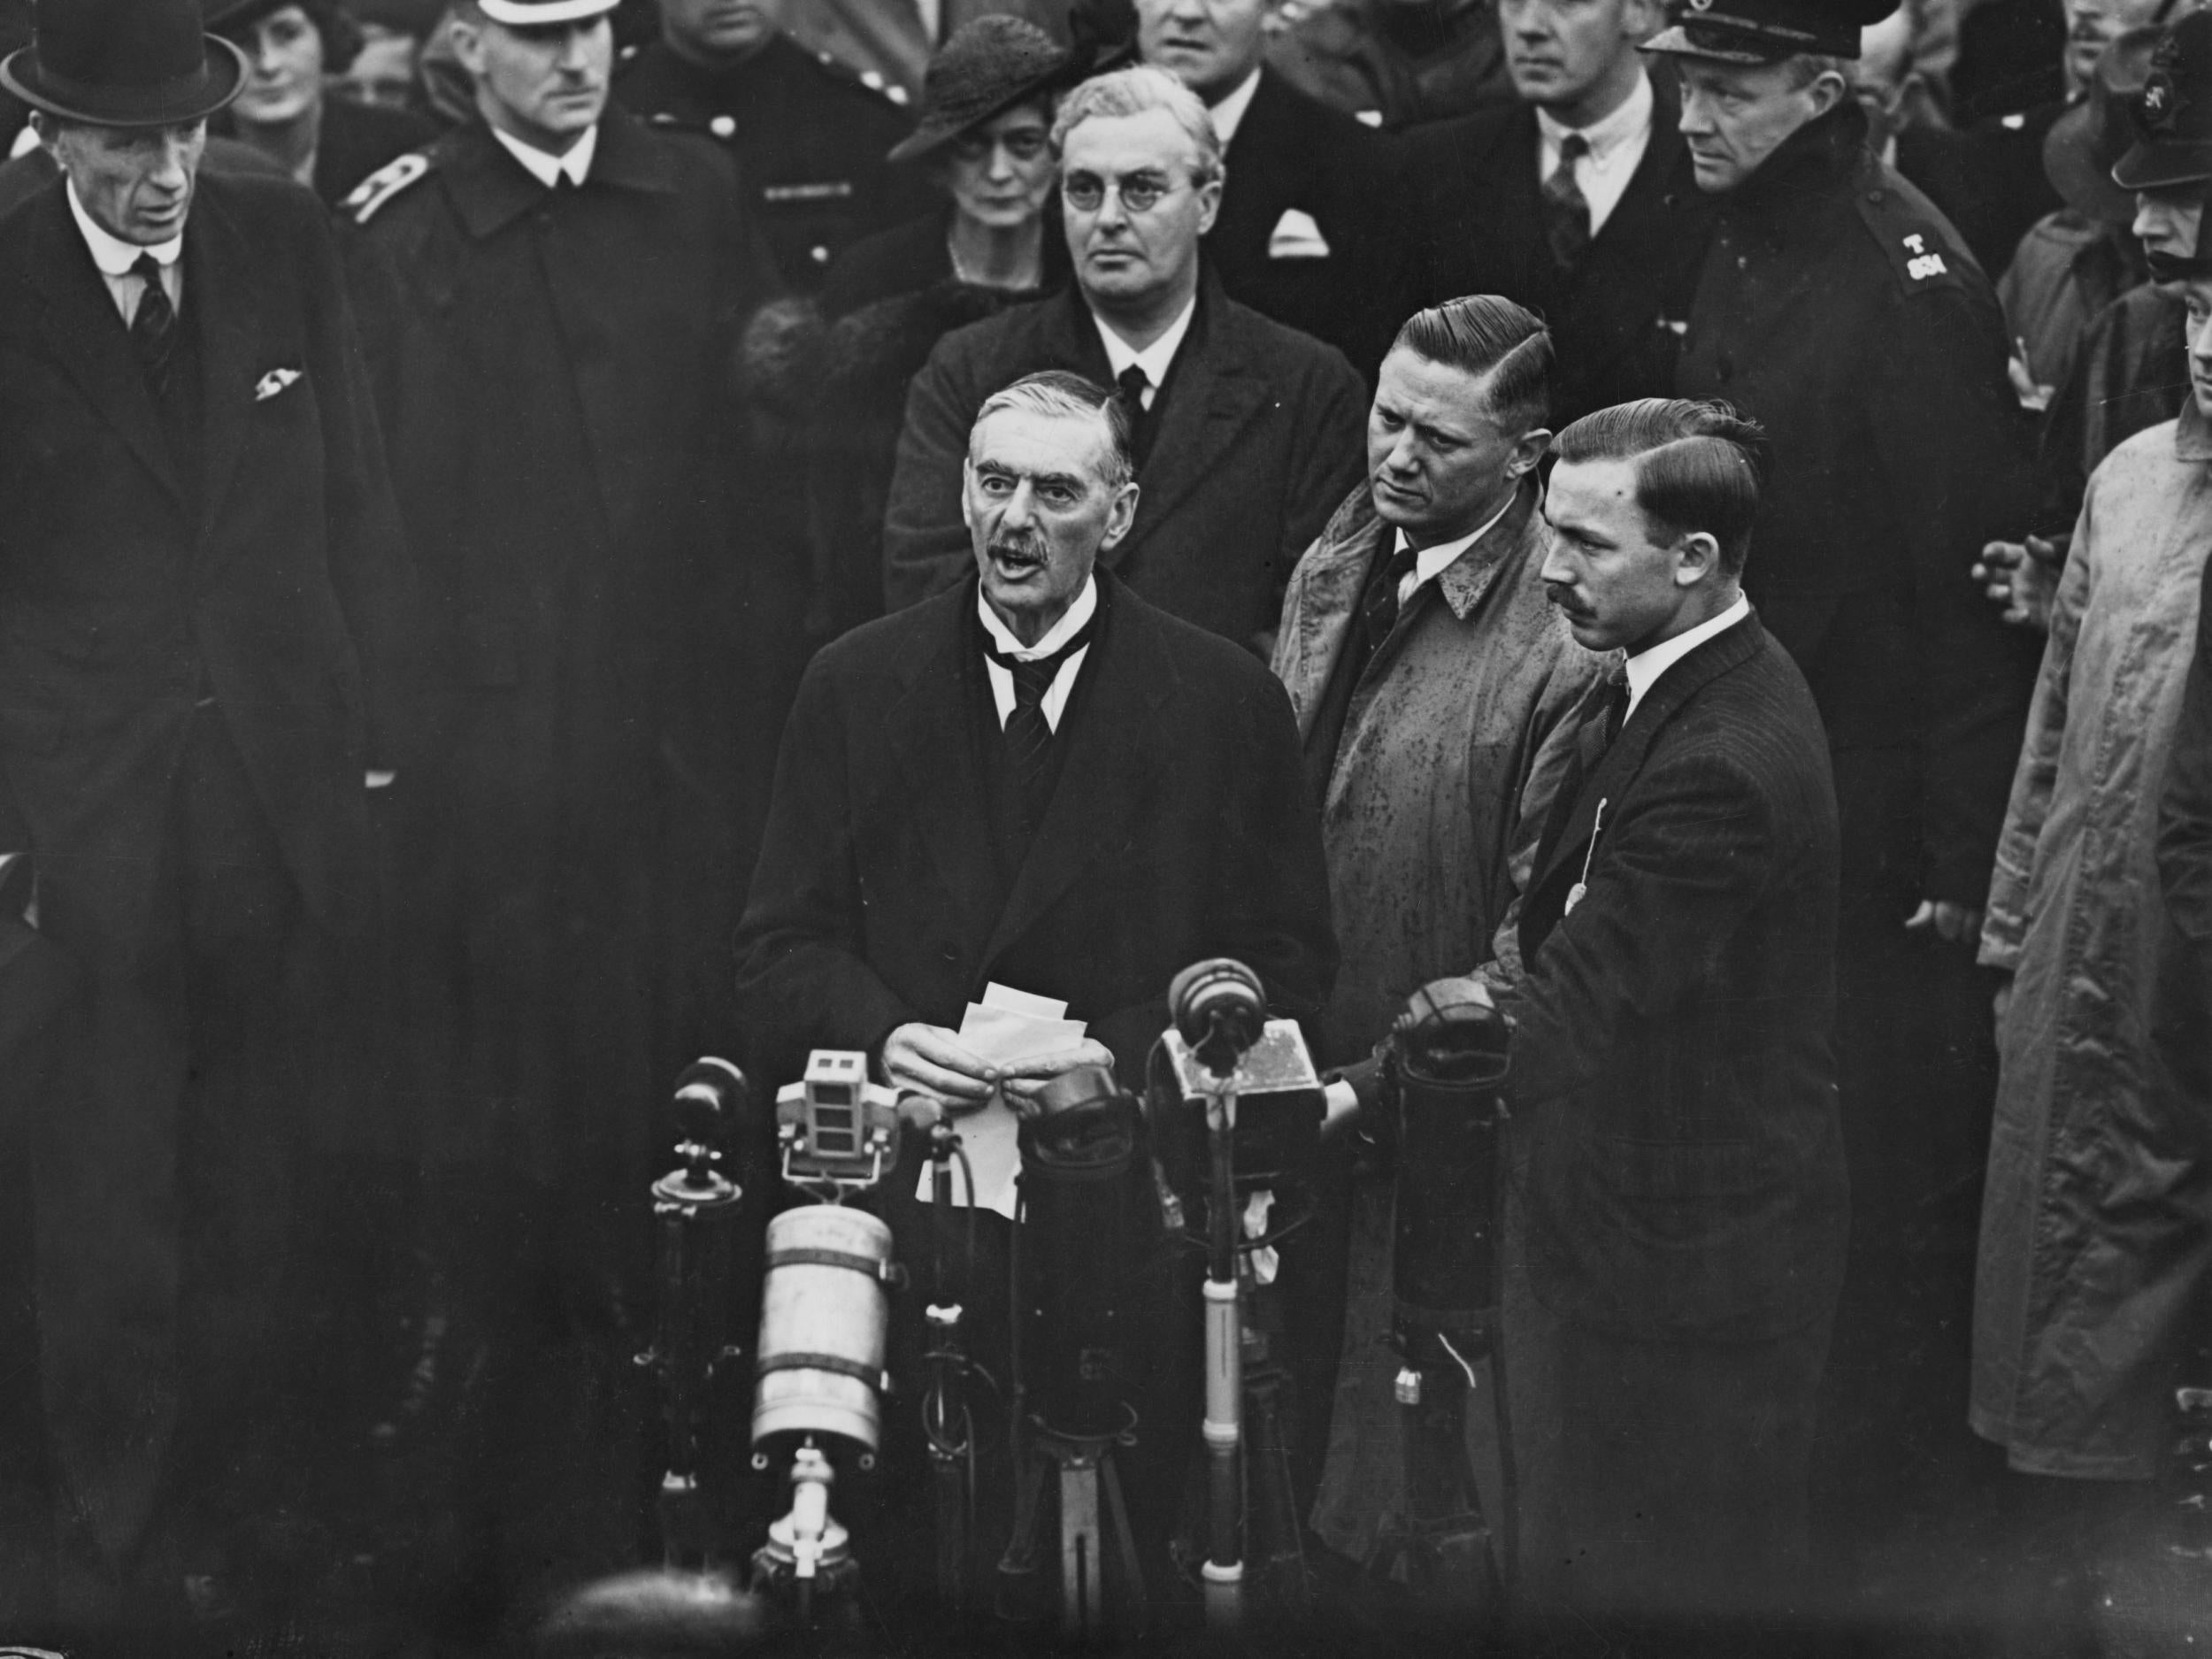 The missing documents, if found, could well shed new light on precisely what Chamberlain would have known of the development of French, German and Italian intentions in the run-up to the Munich Agreement